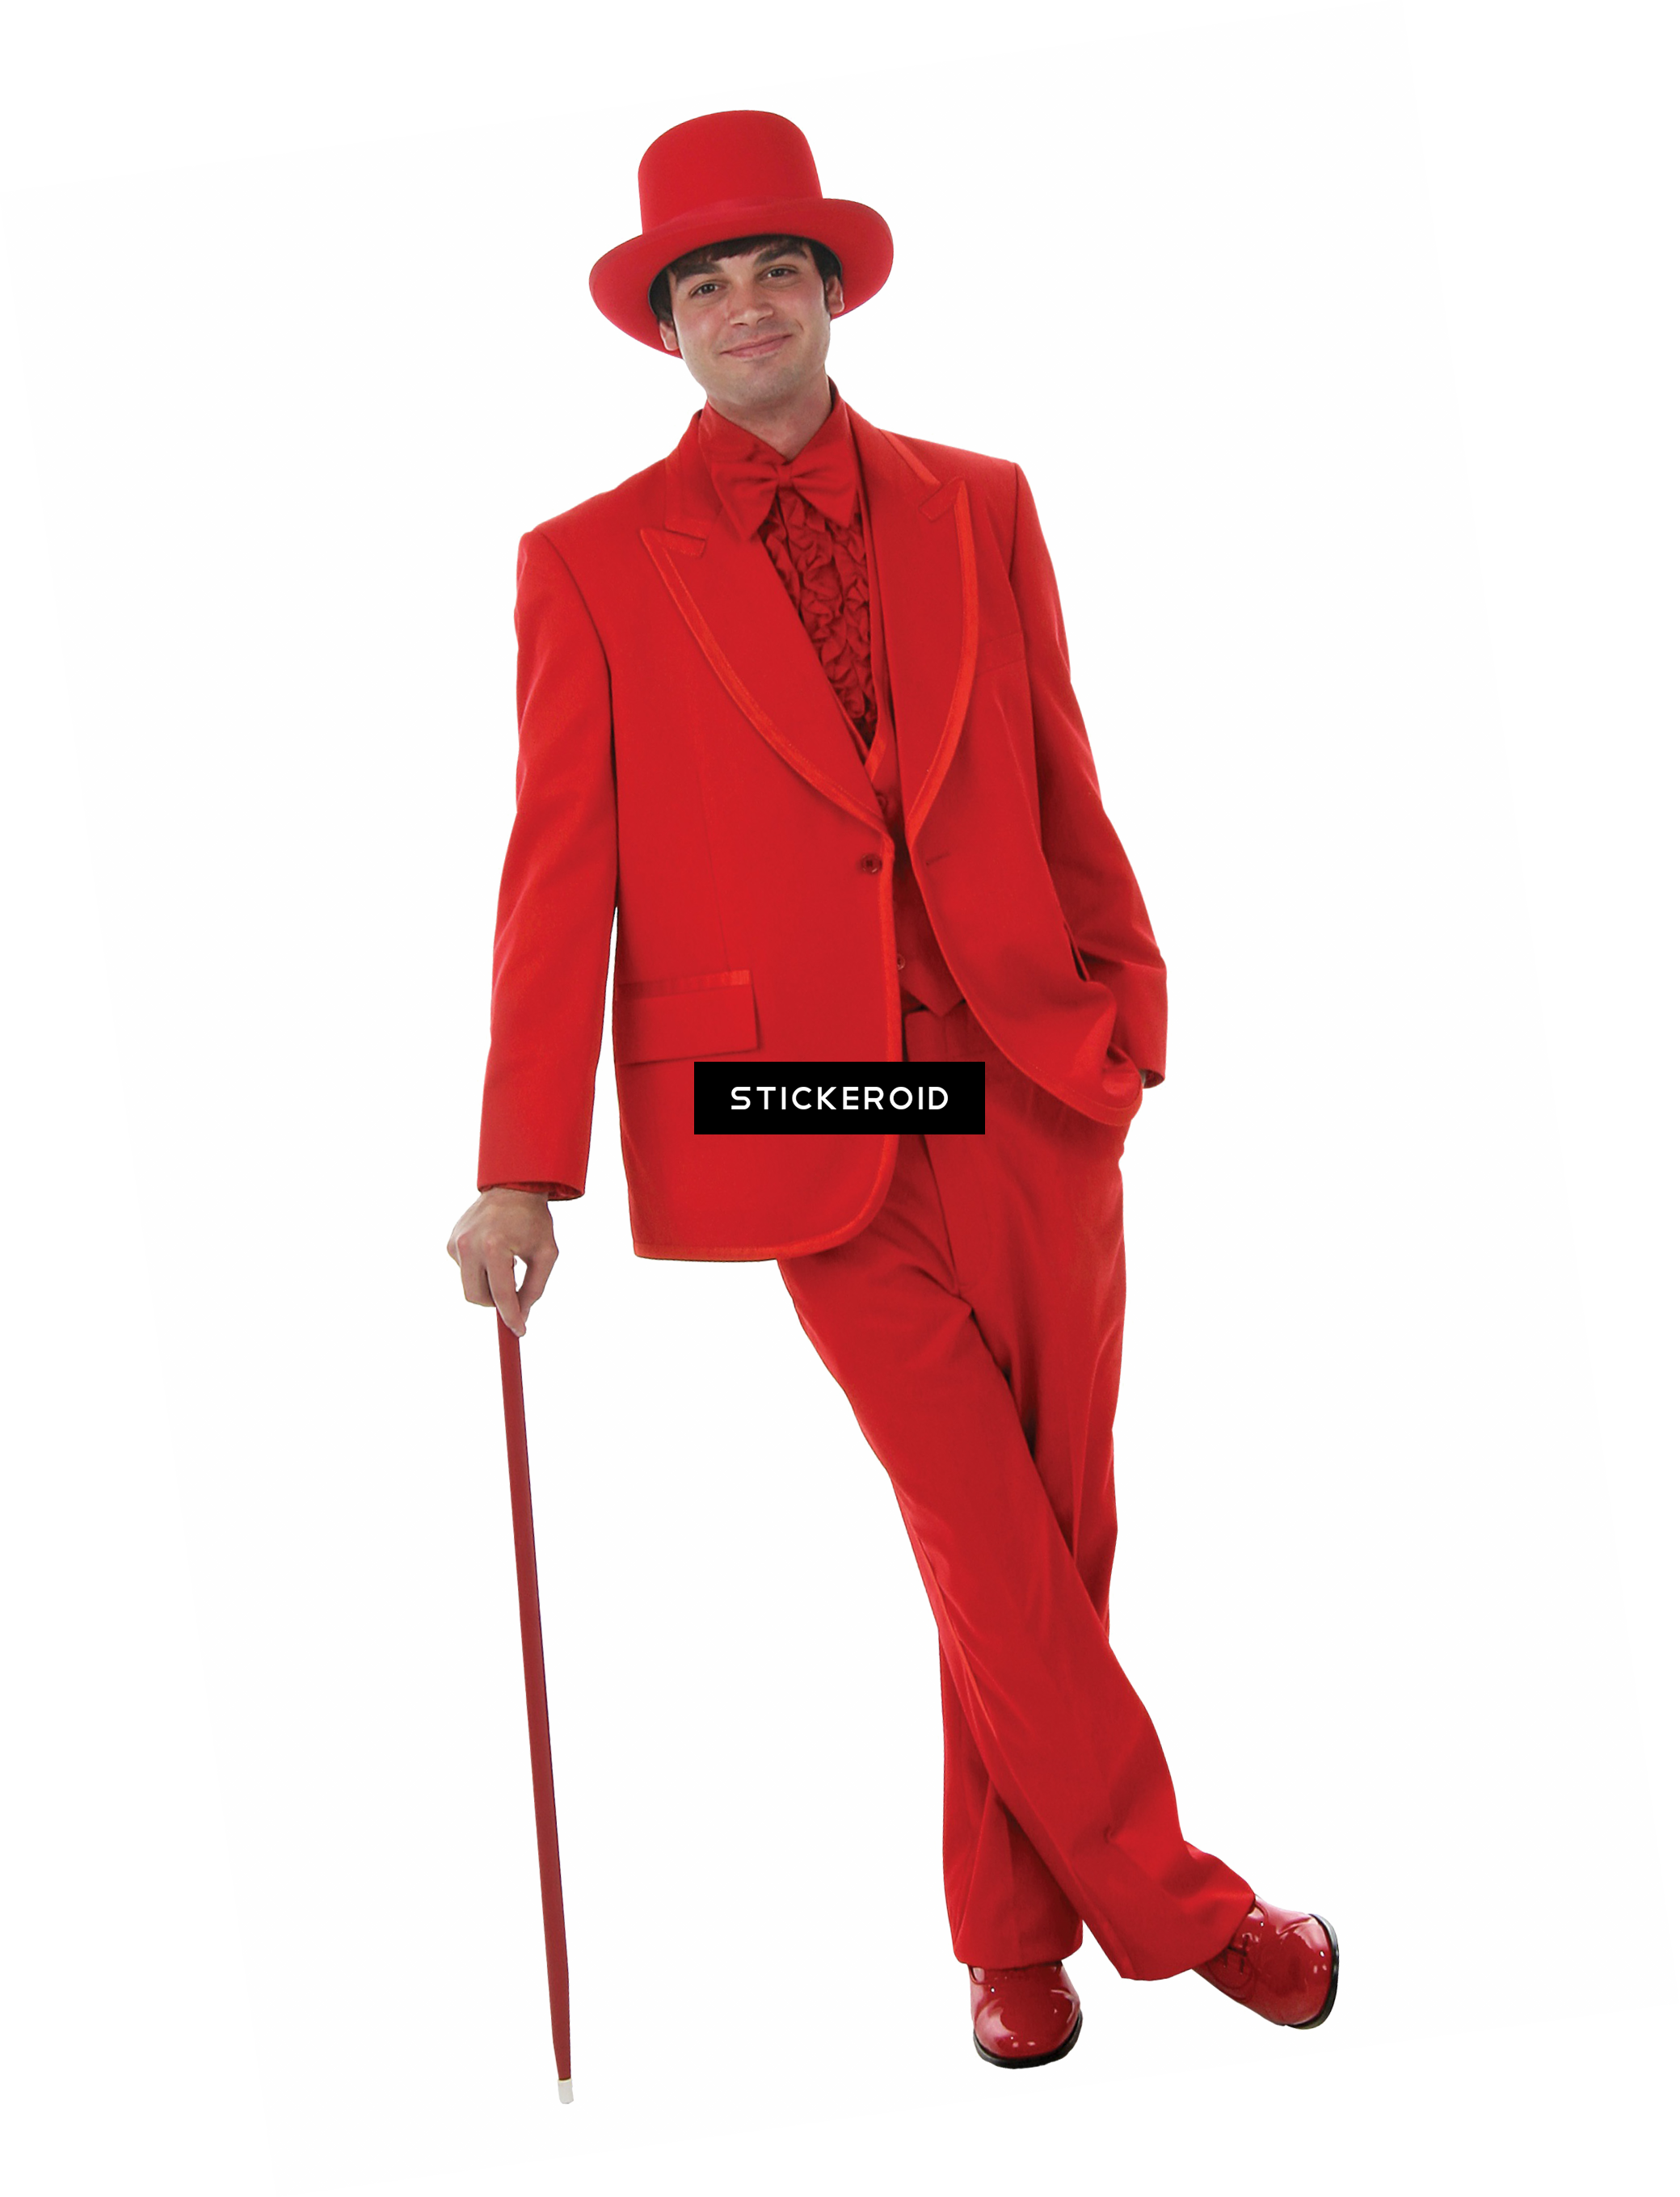 Download Tuxedo Clothing - Men's Red Tuxedo C419944 PNG Image with No ...